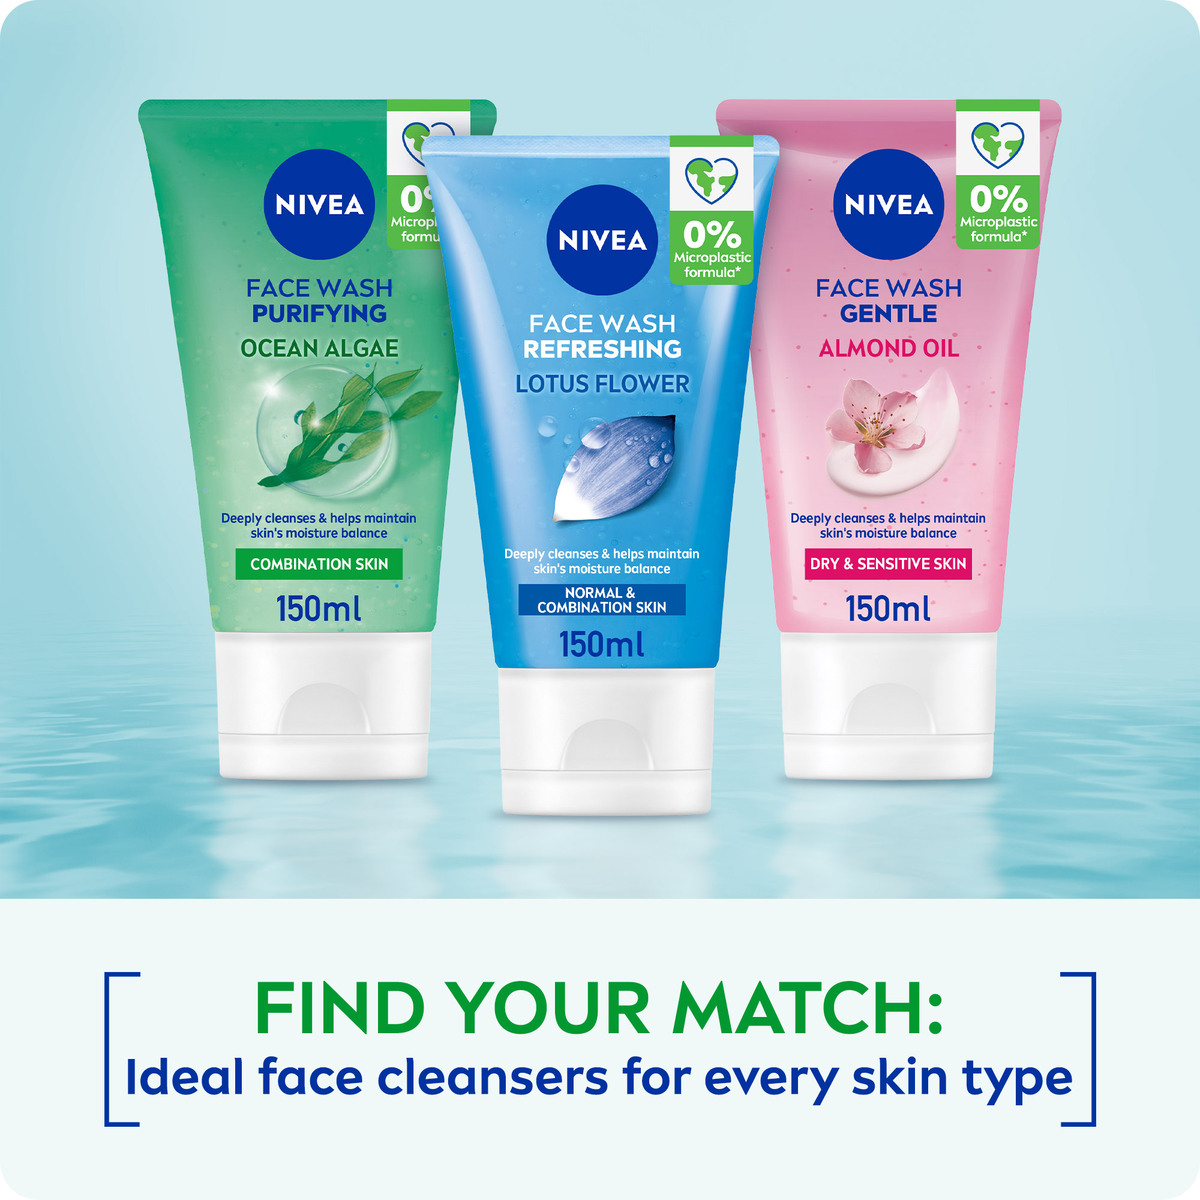 Nivea Face Wash Cleanser Purifying Cleansing 150 ml